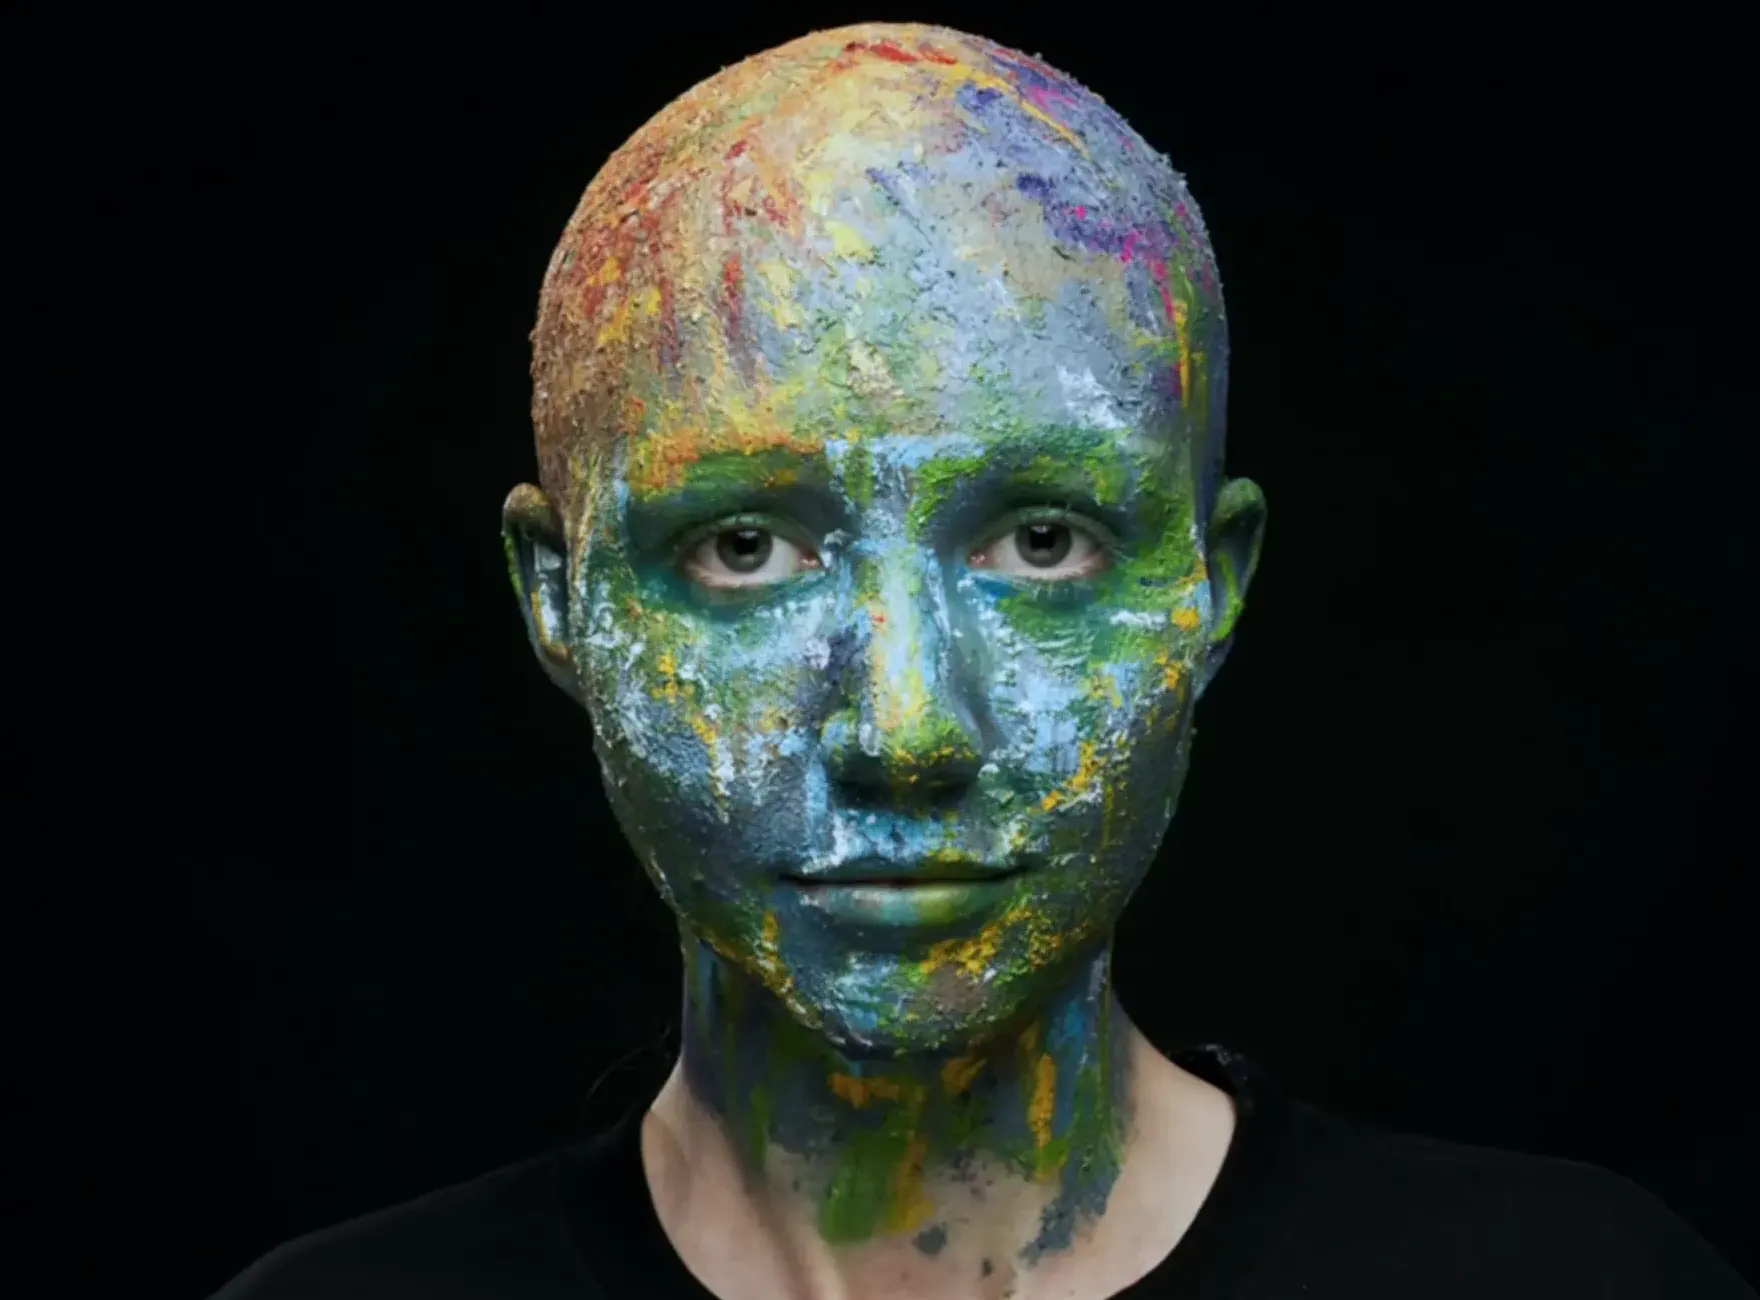 Woman's entire face painted with several colours including her bald head